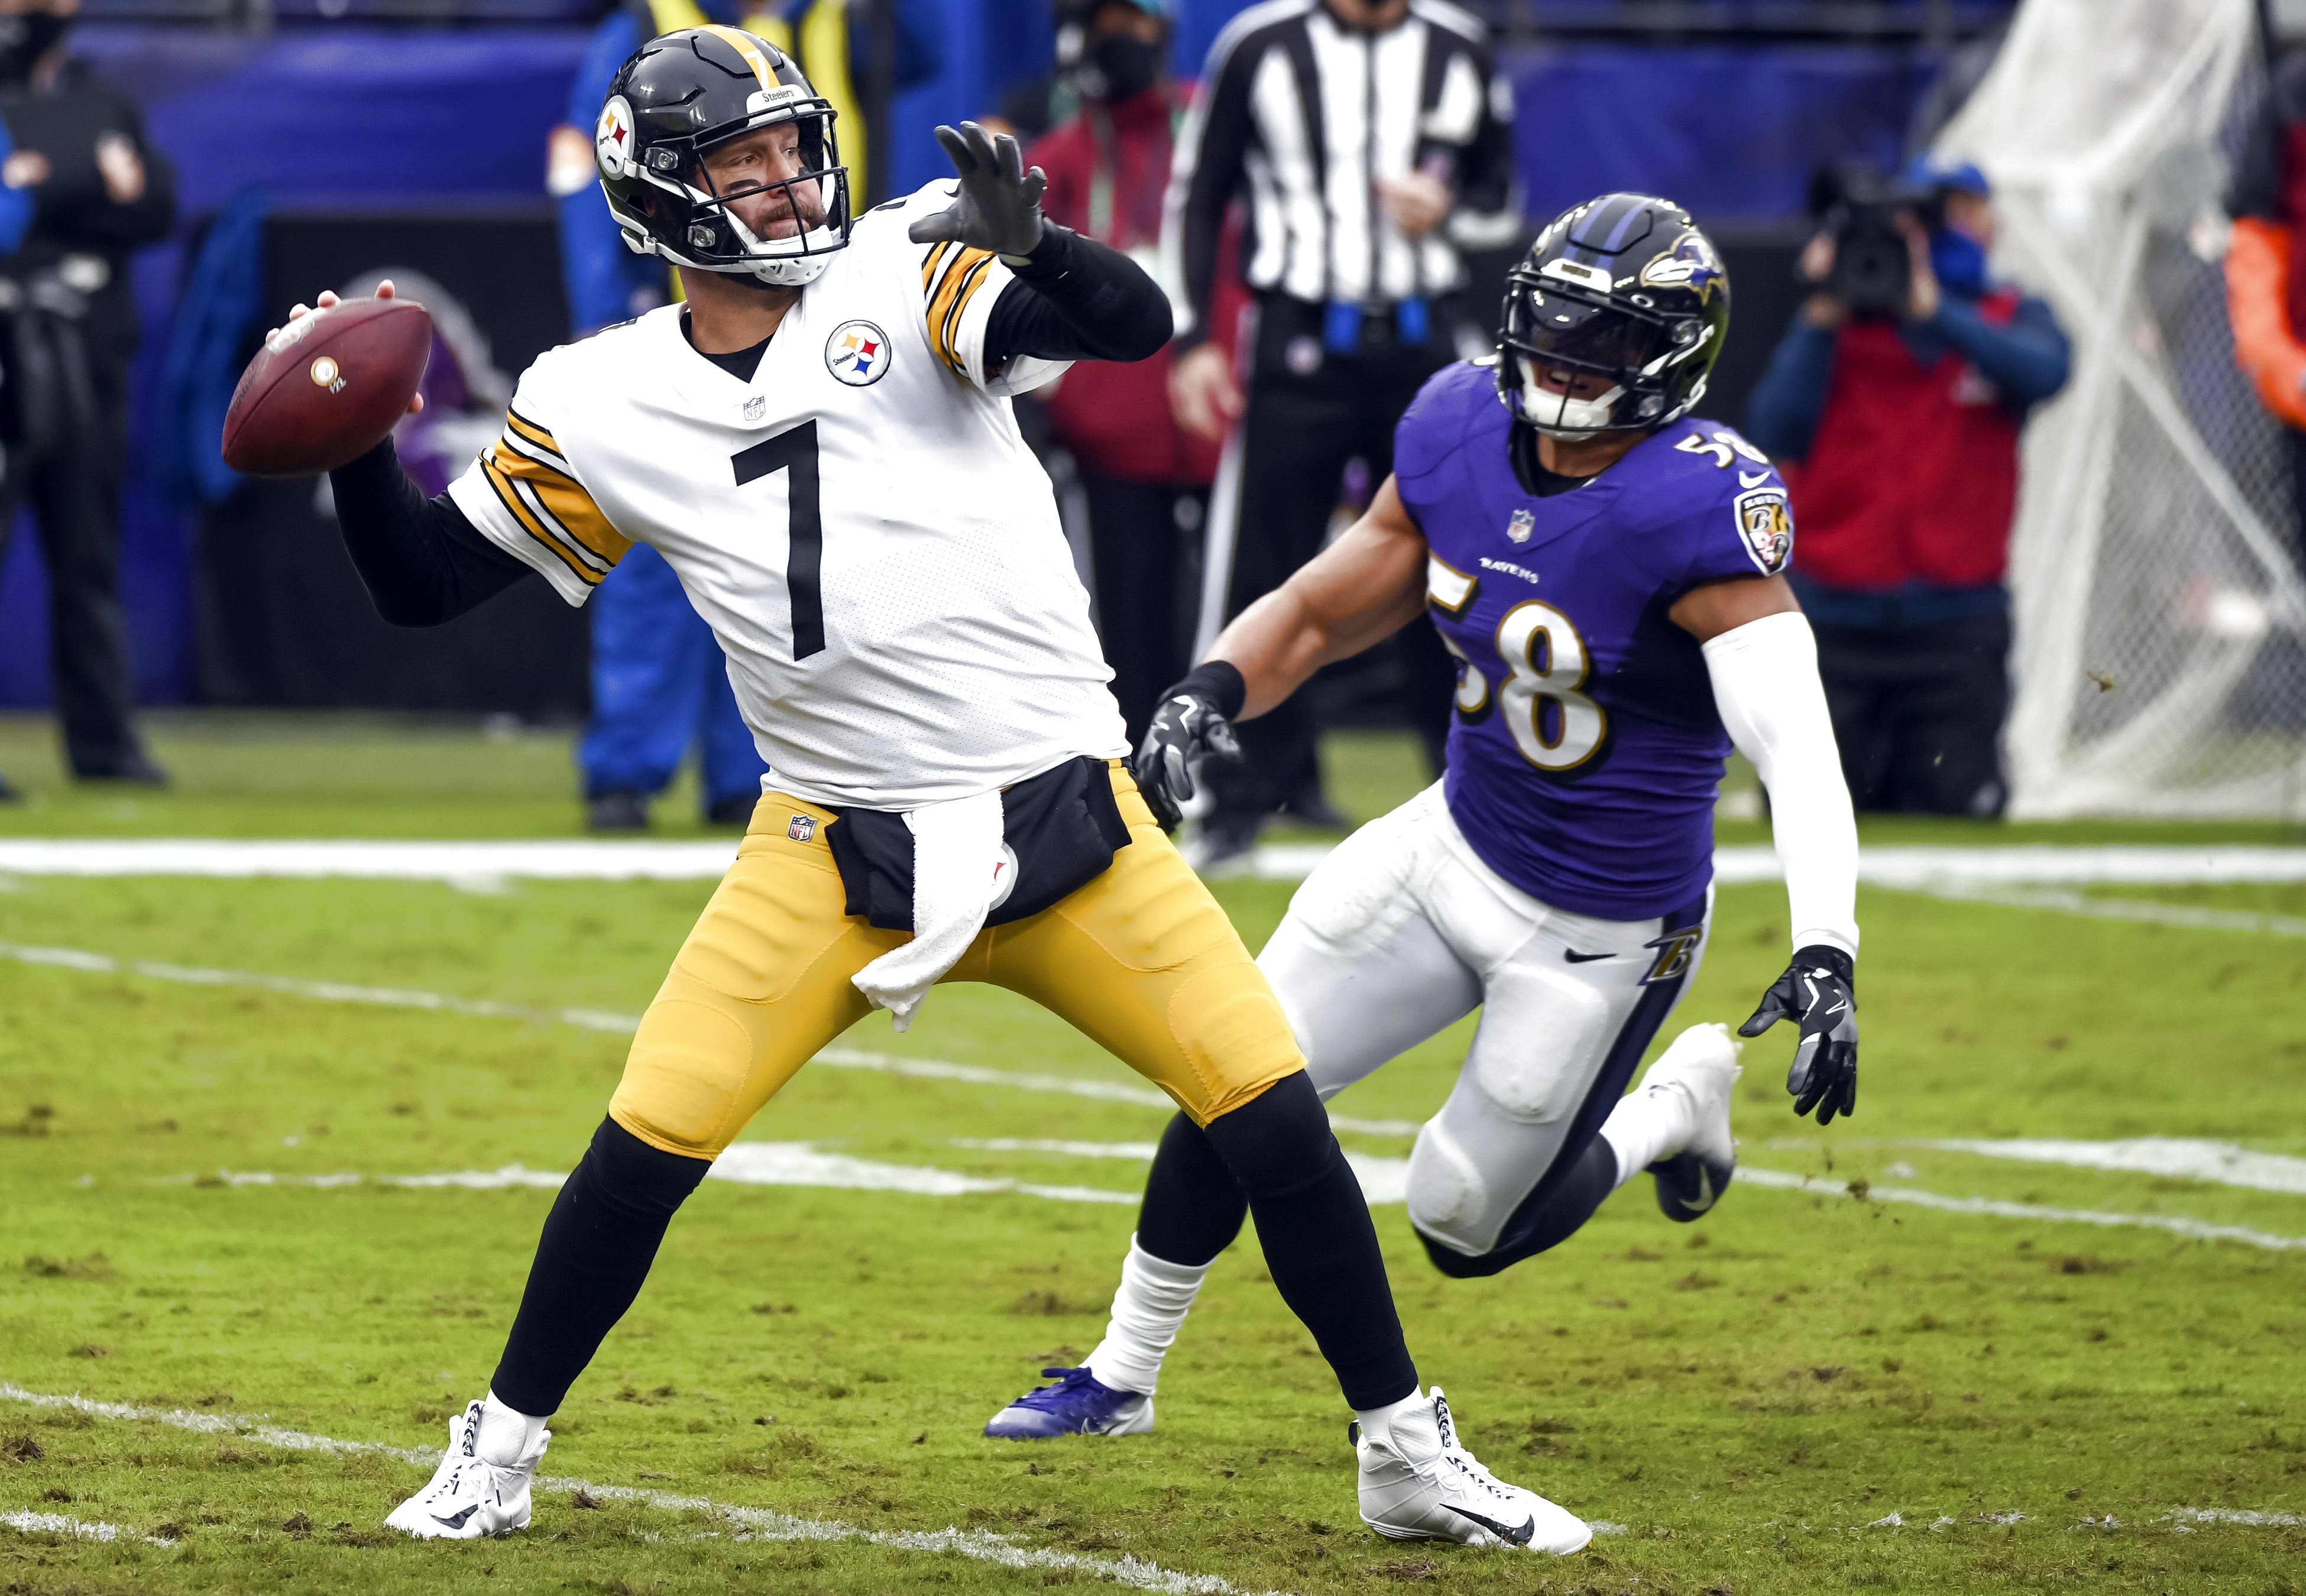 NFL's Steelers-Ravens game postponed a third time due to Covid-19